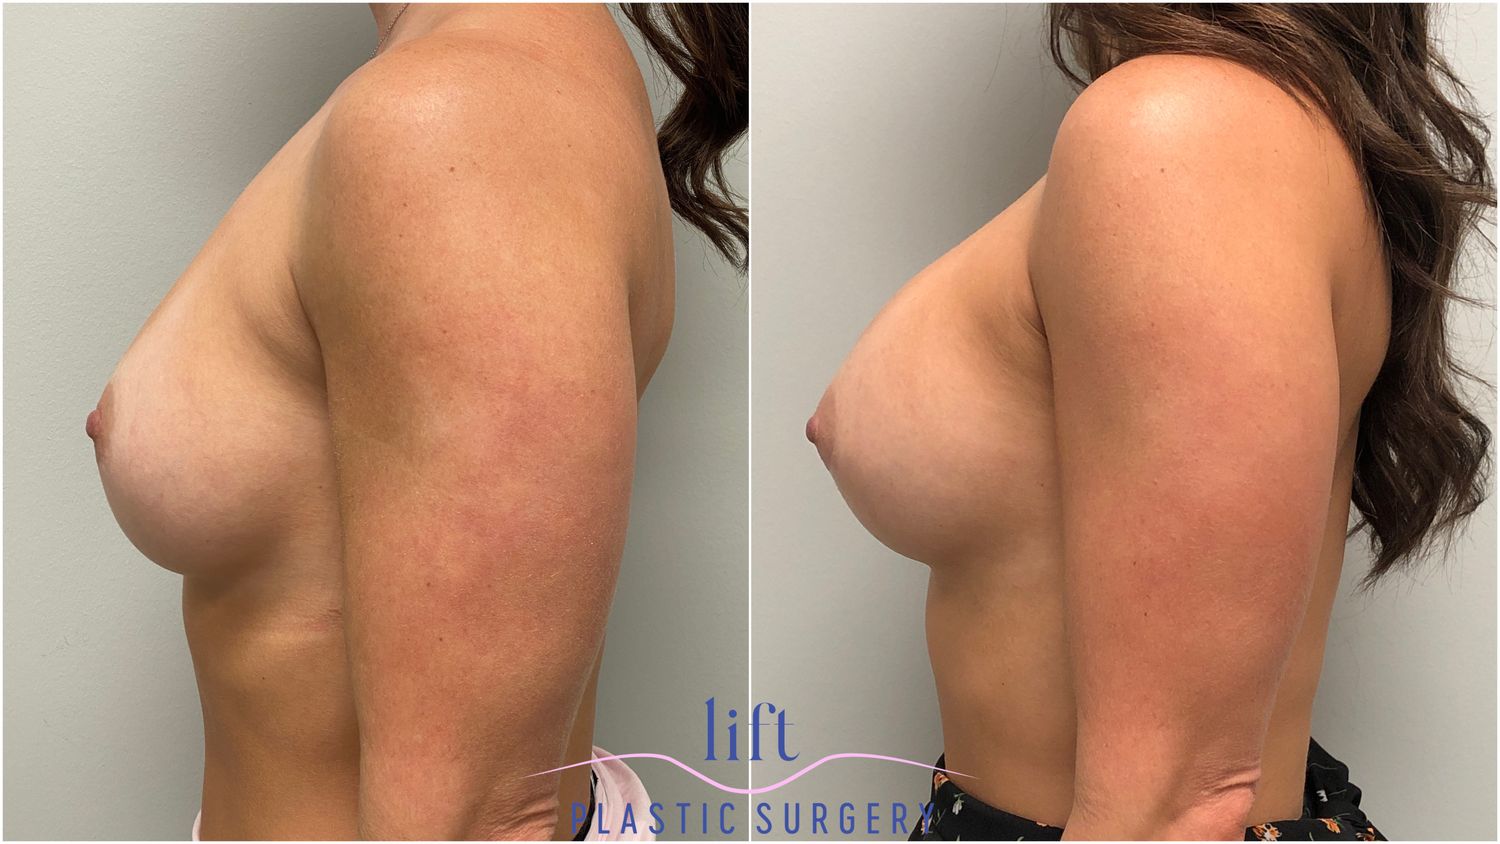 Breast Implant Exchange Before &#038; After Photos